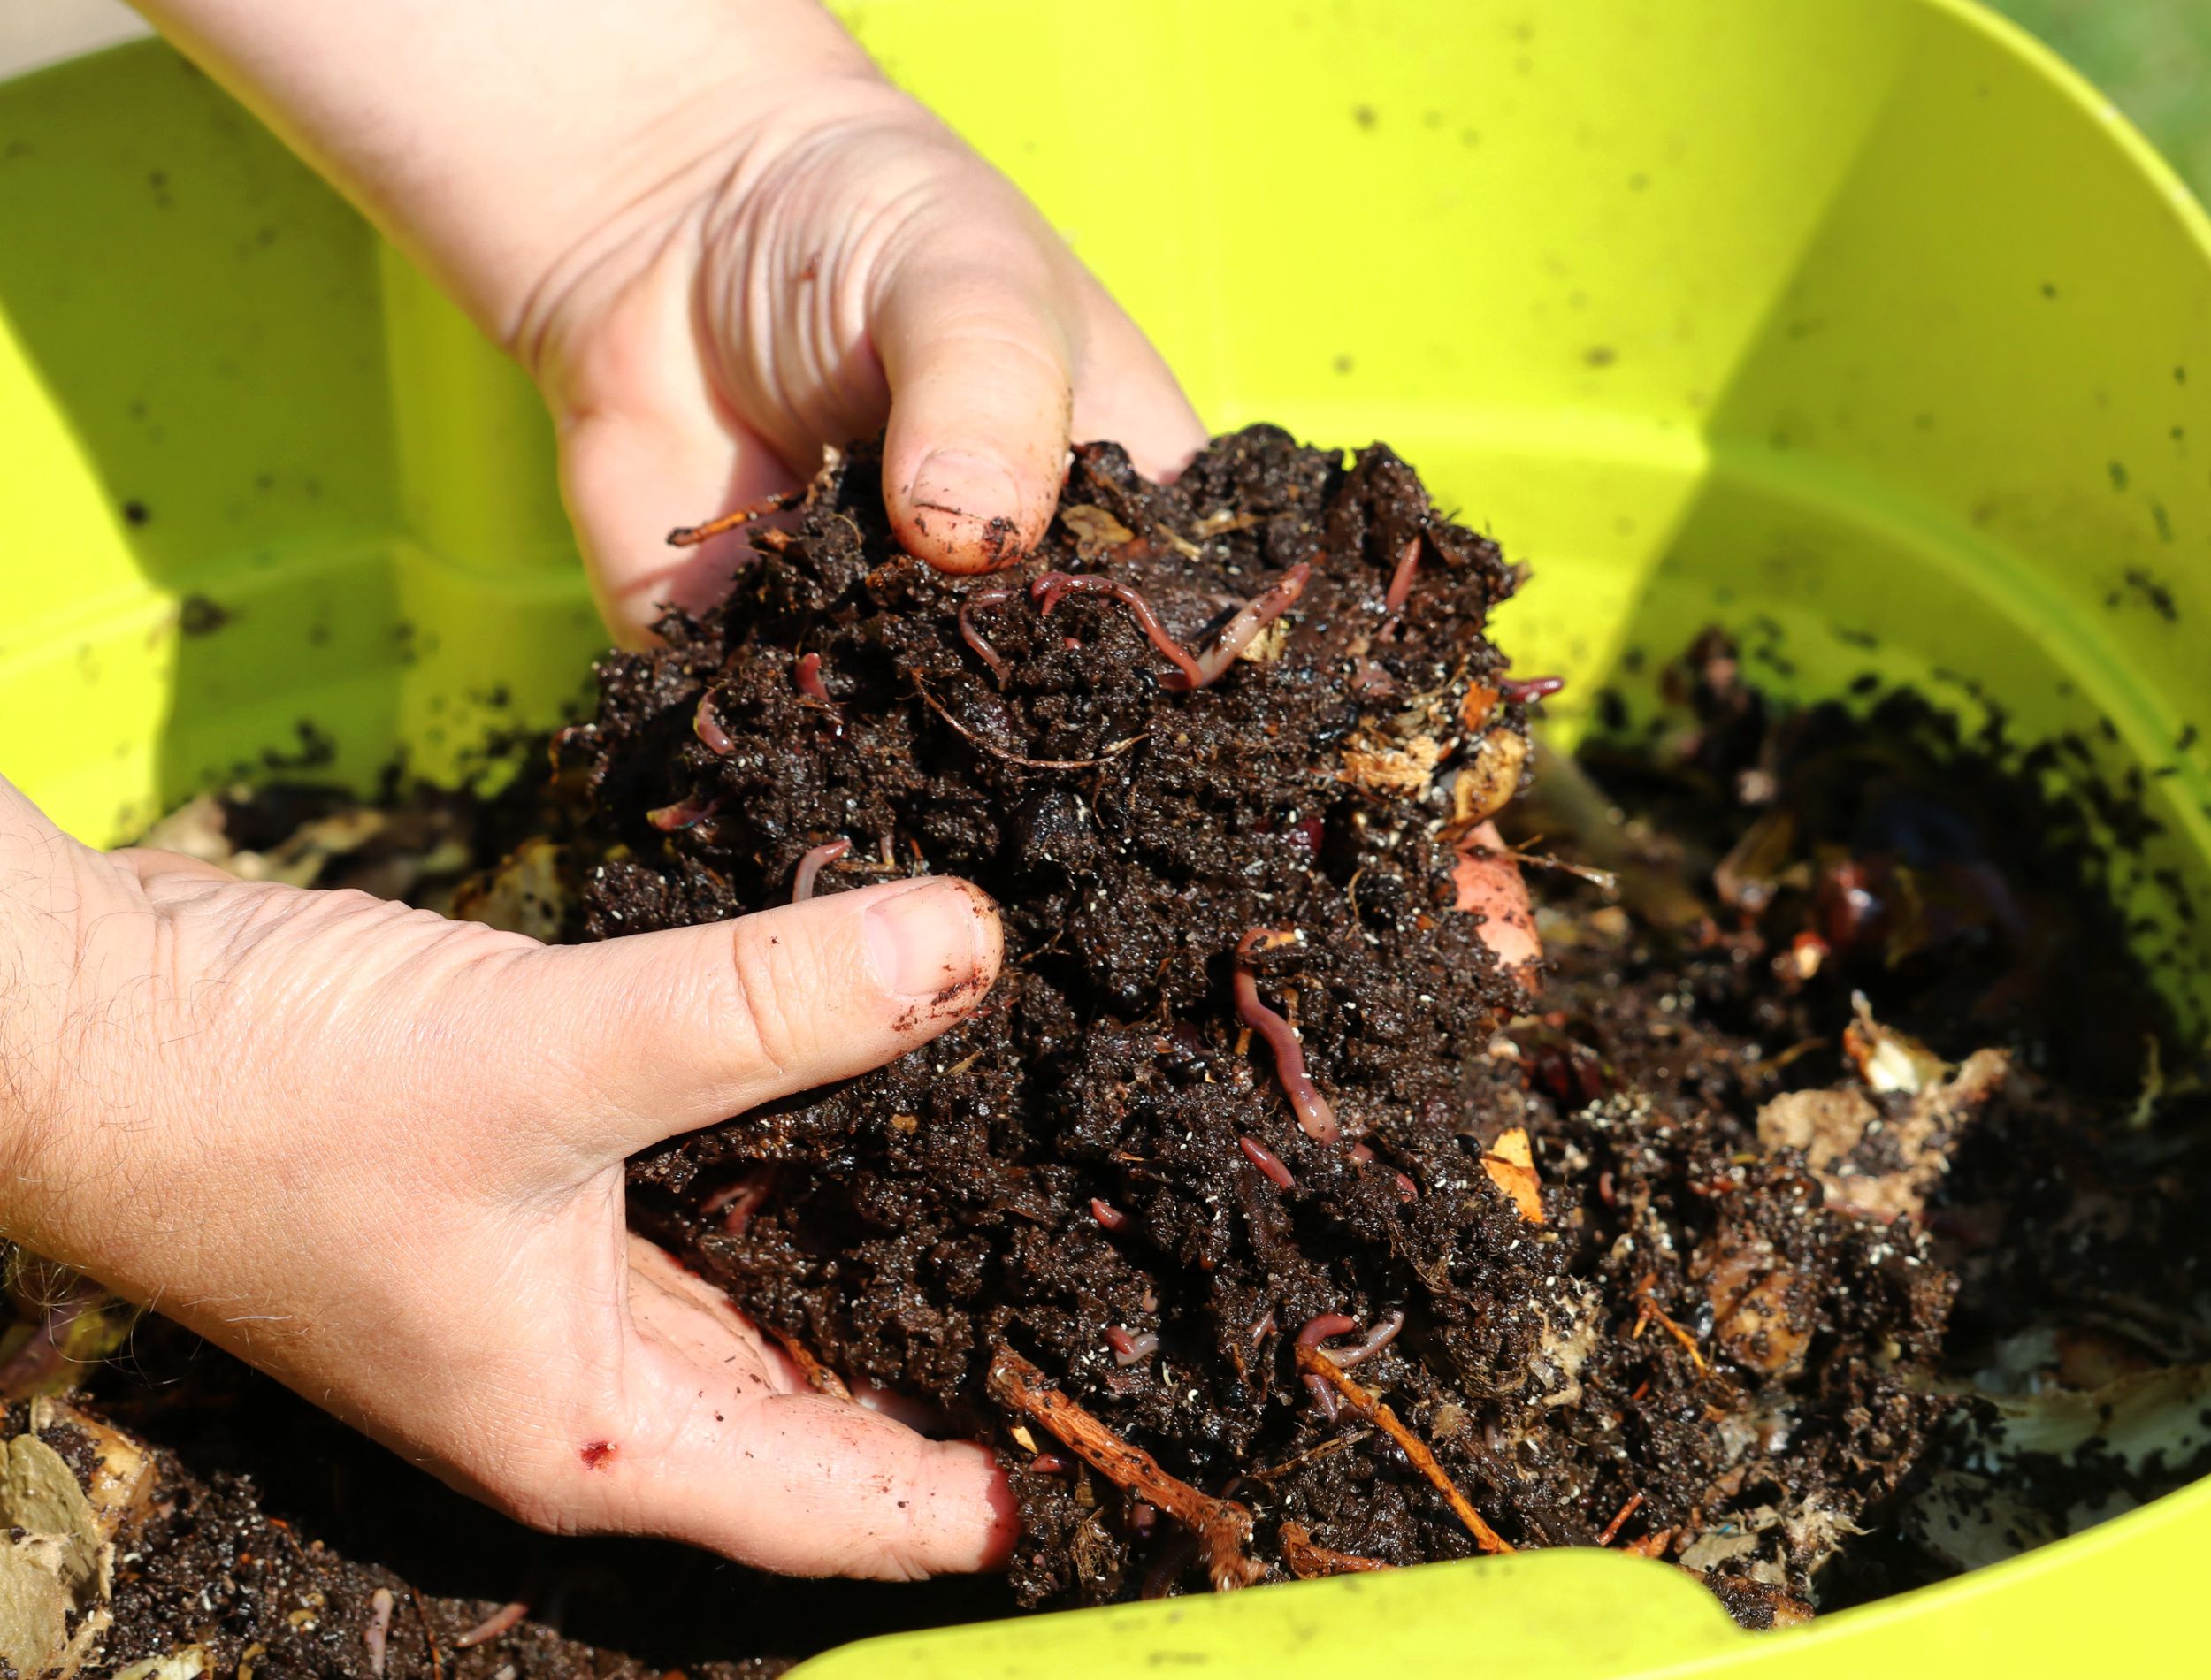 Earthworms in green vermicomposter, hidden in dirt, making compost